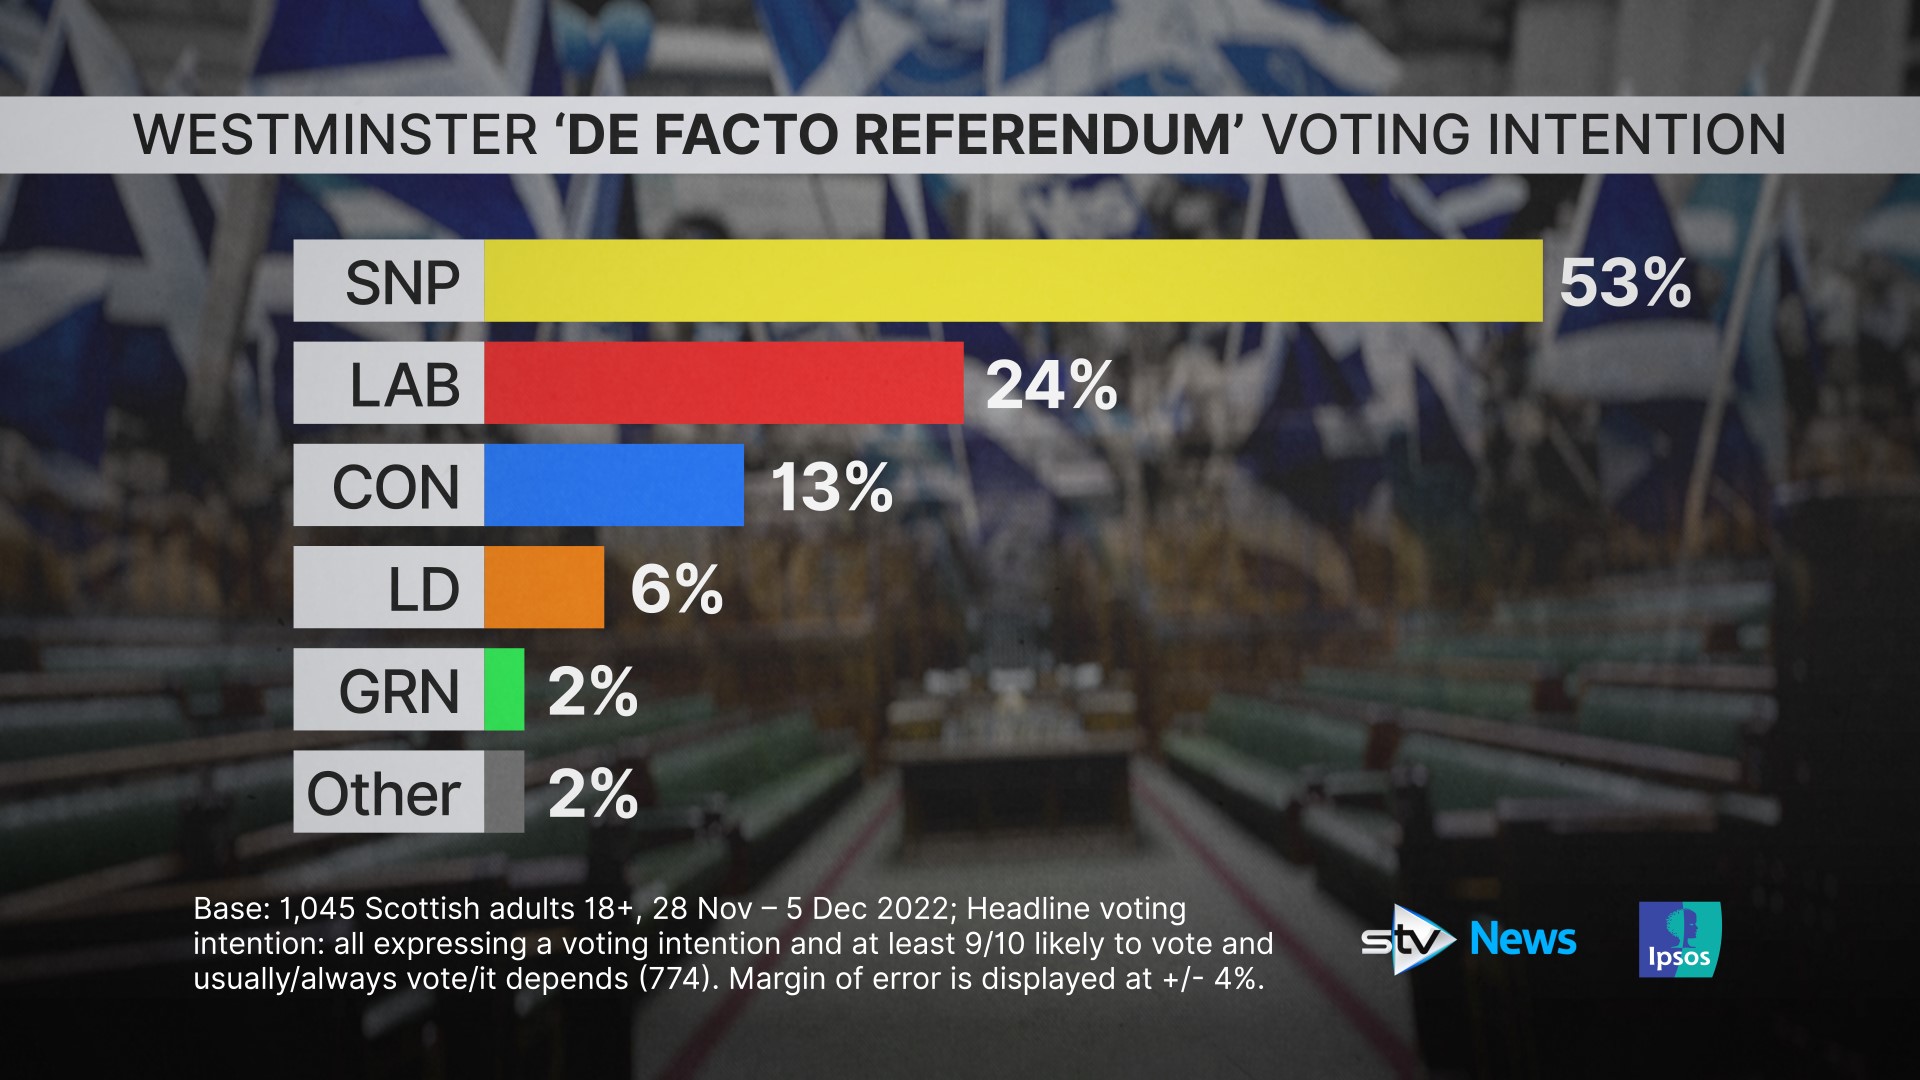 De facto referendum voting intention shows 55% vote share for pro-independence parties